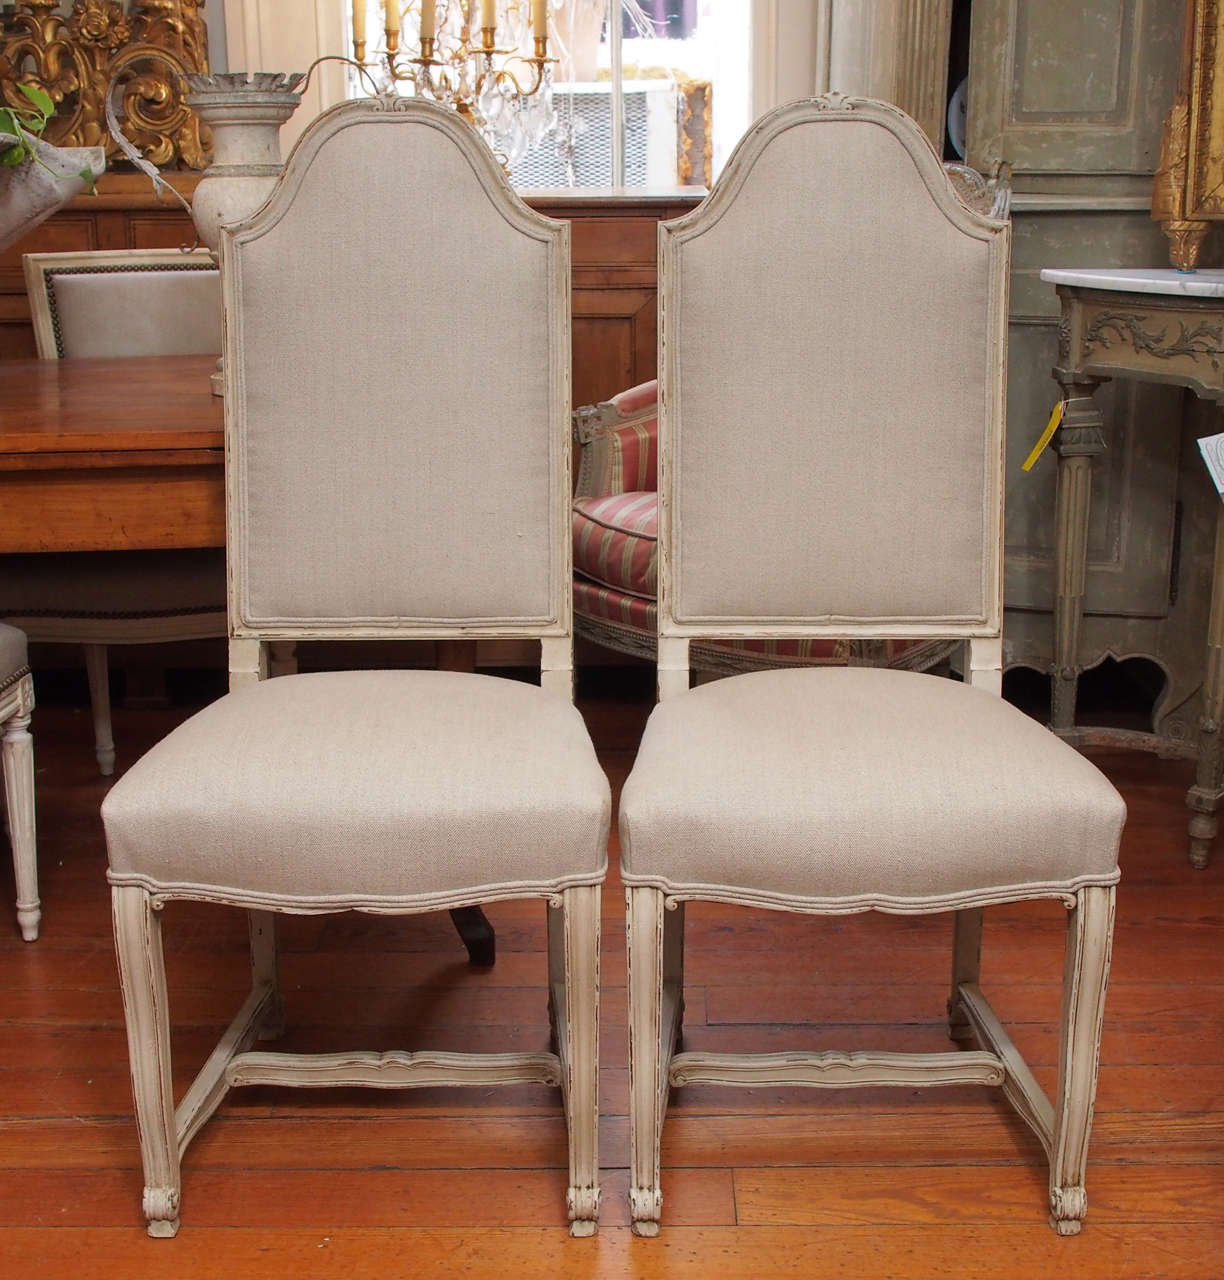 Set of eight French vintage dining room chairs, circa 1920. Freshly repainted and brand new linen upholstery.